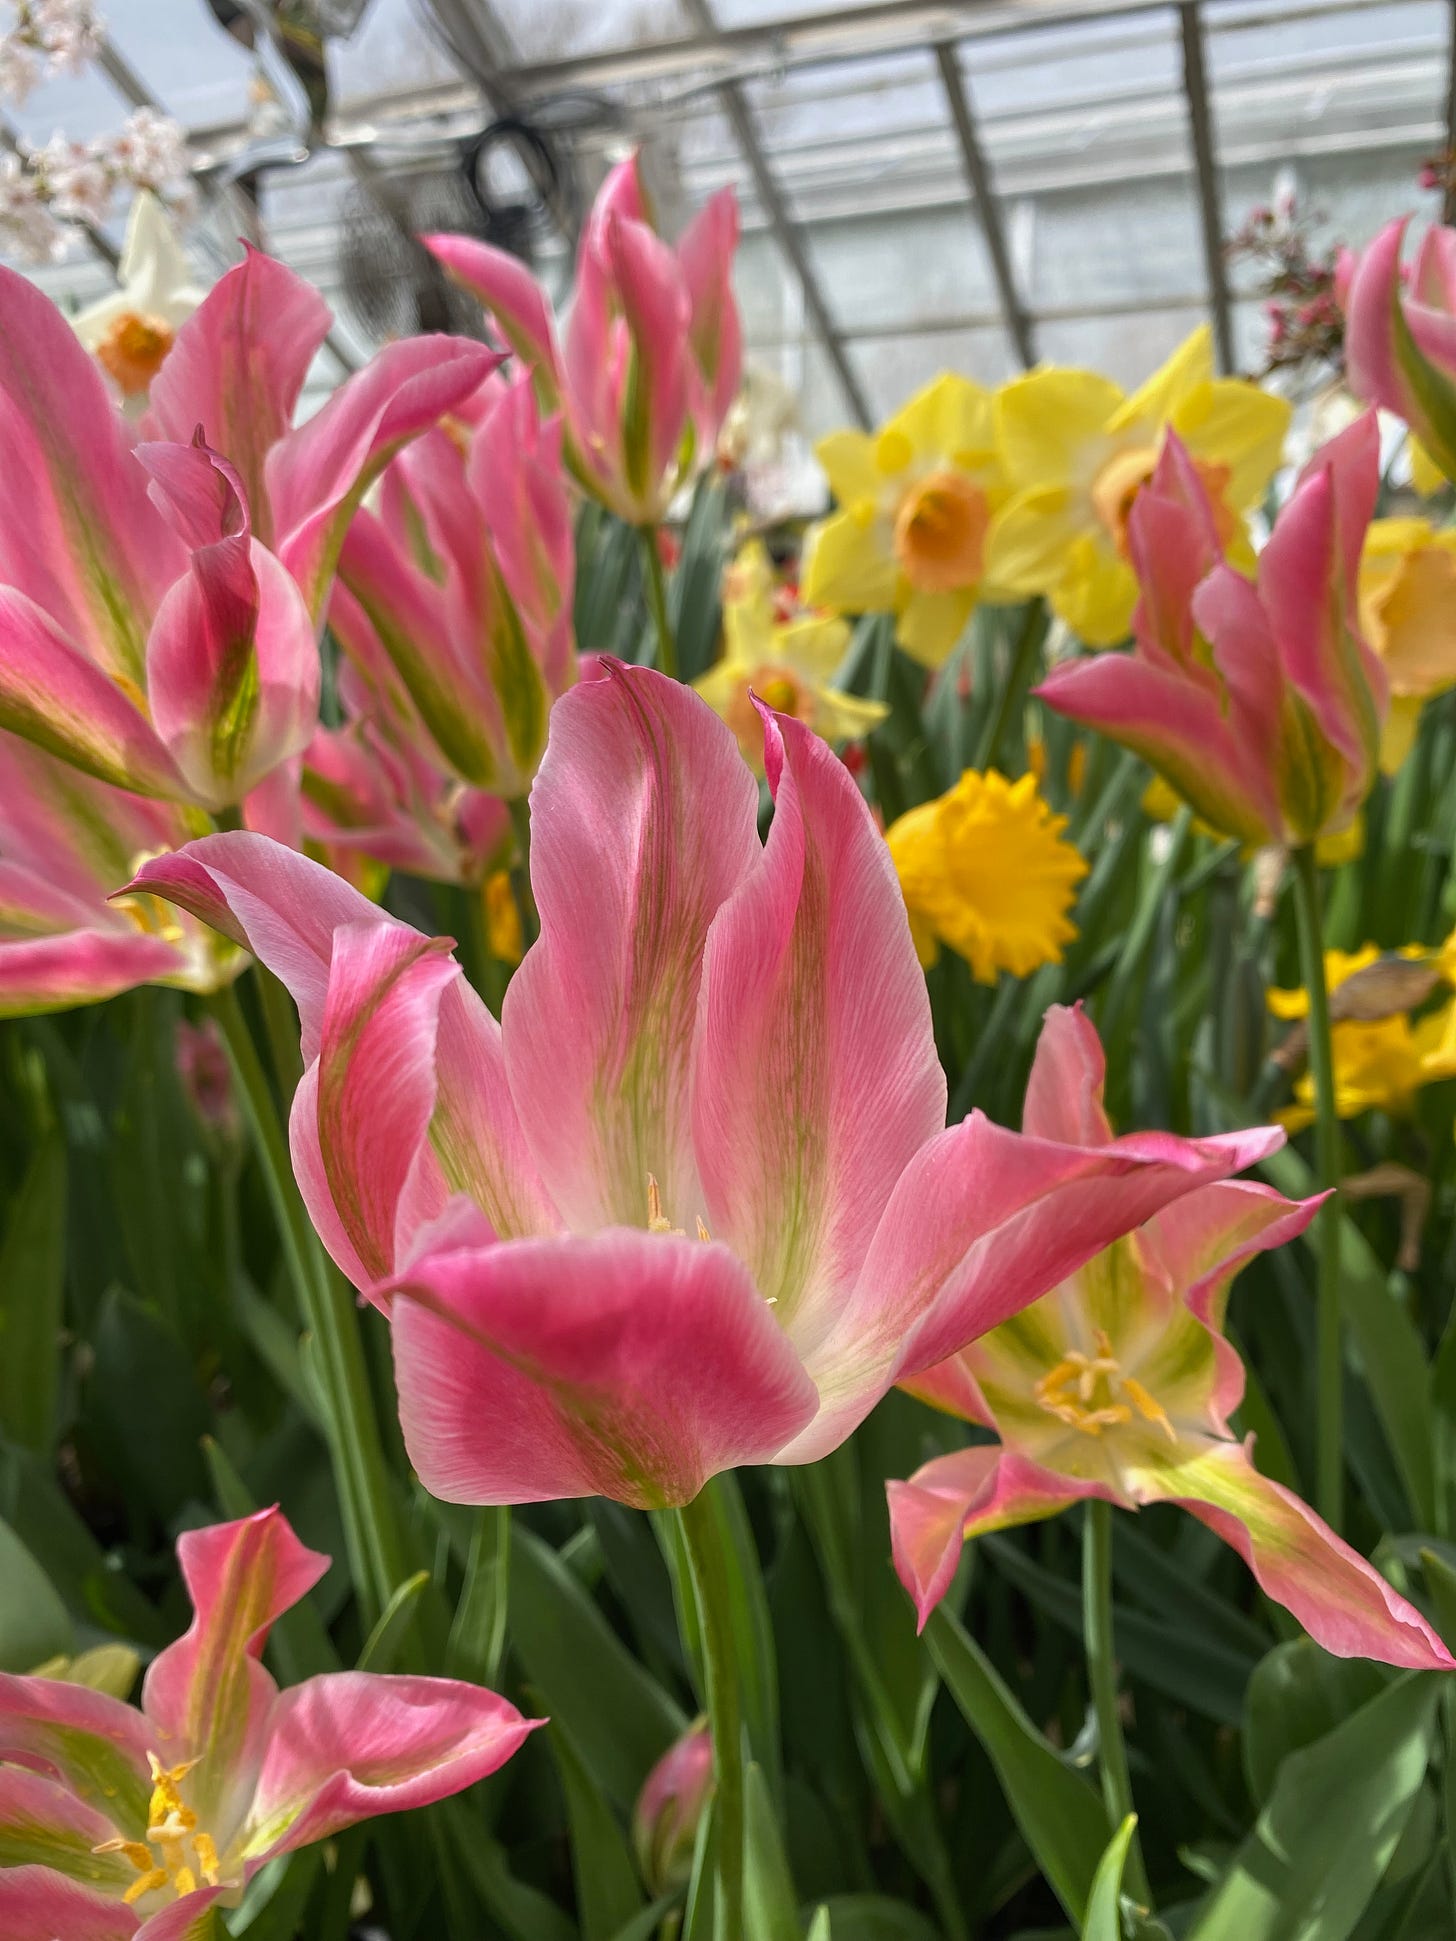 A closeup of purple and green tulips and bright yellow daffodils in a greenhouse.